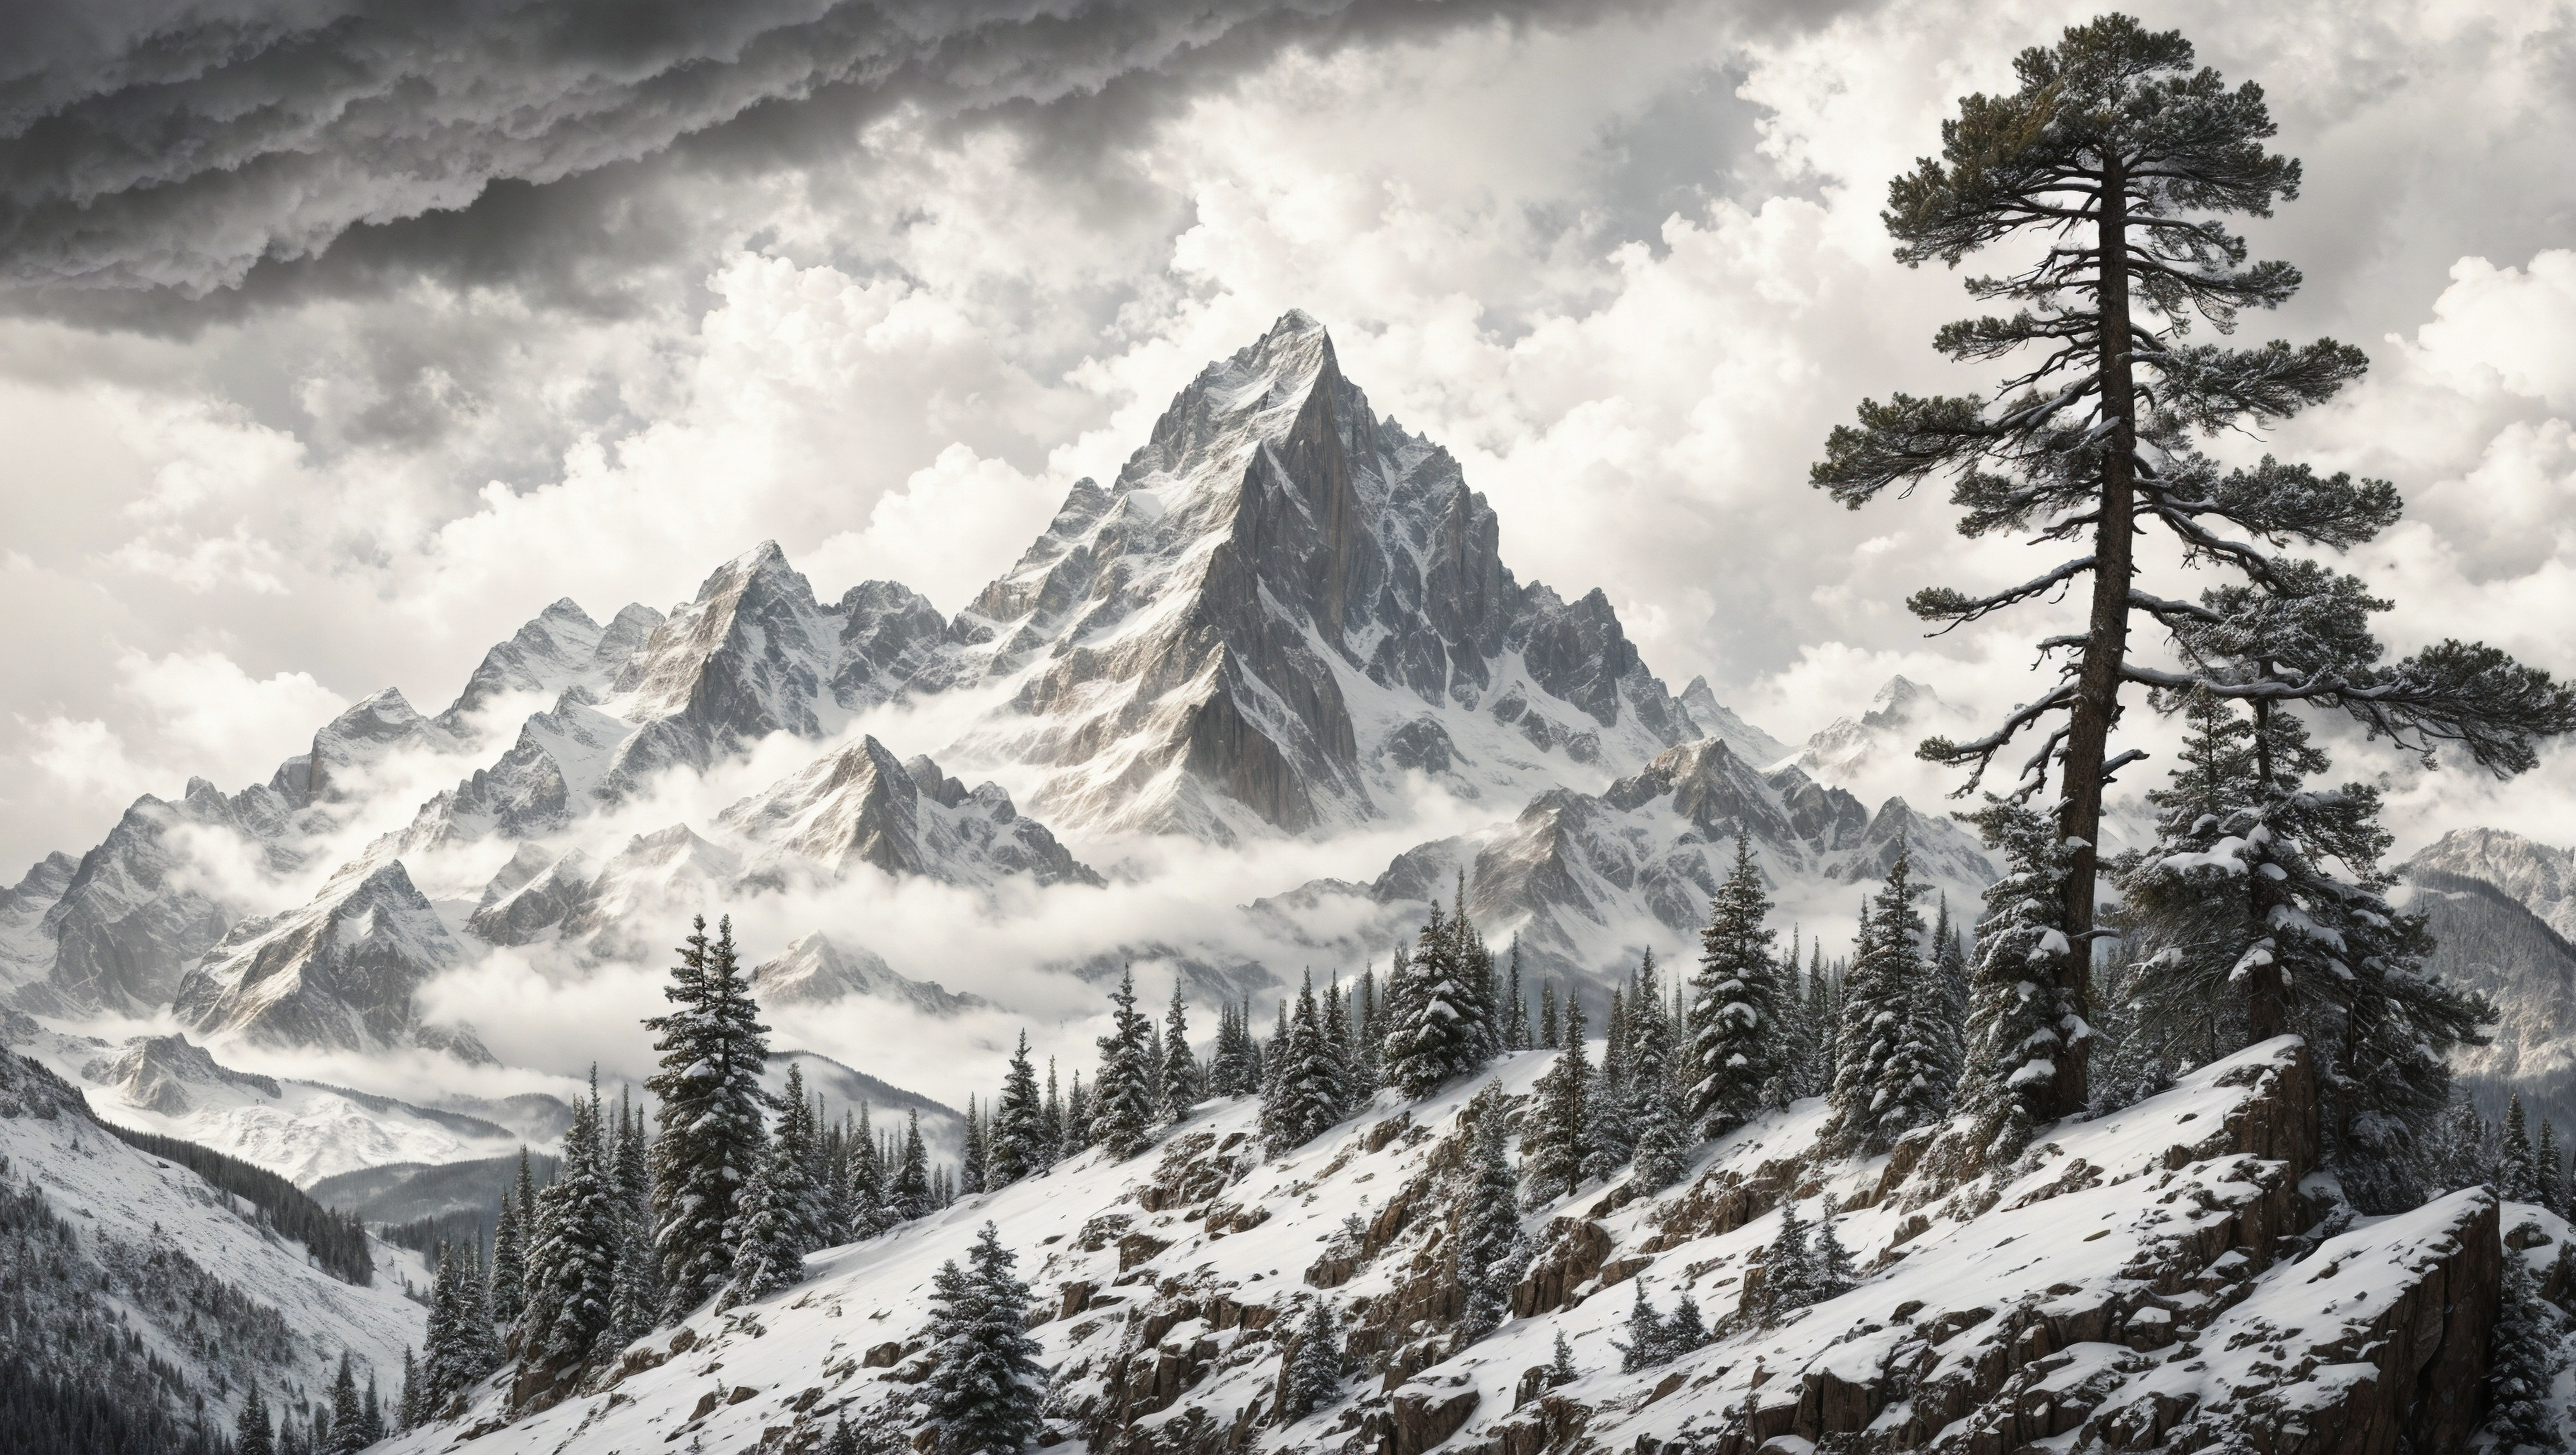 General 4080x2304 AI art digital art digital painting landscape mountains fir-tree trees snow storm nature snow covered outdoors mist sky clouds